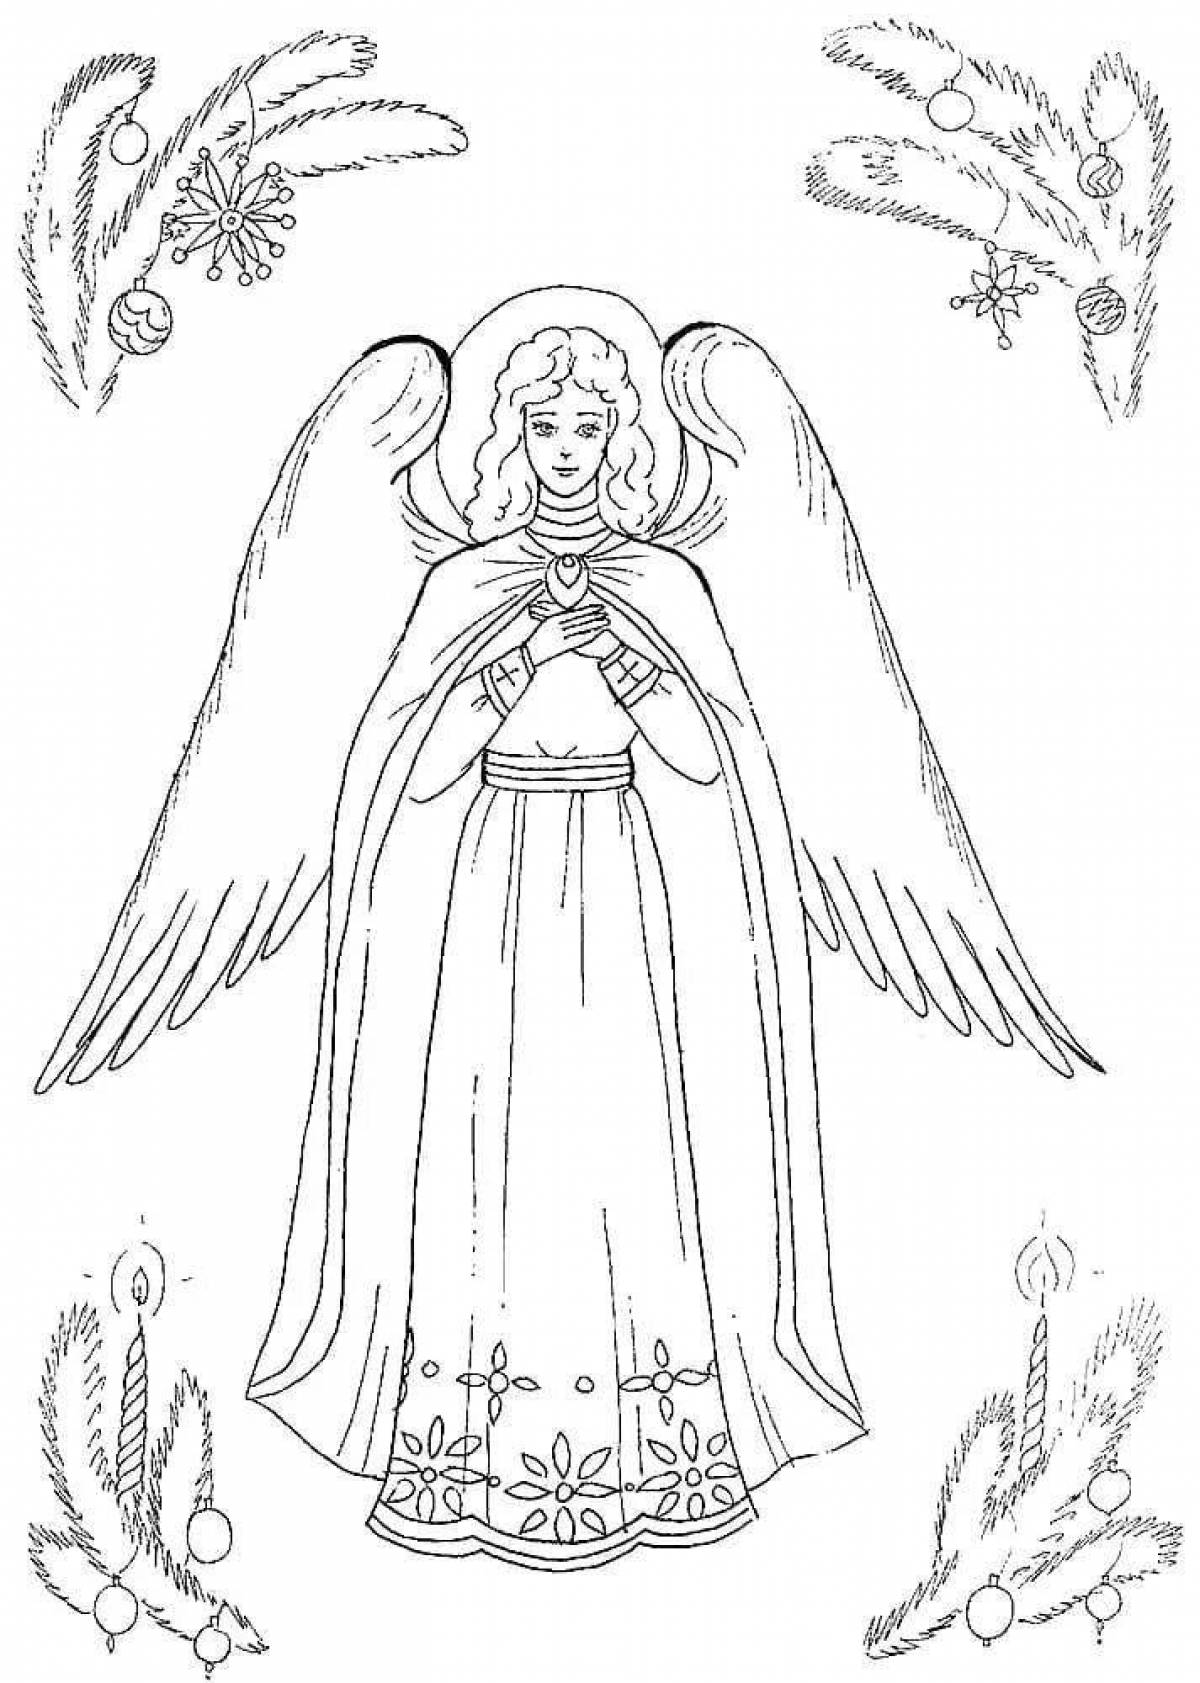 Gorgeous guardian angel coloring page